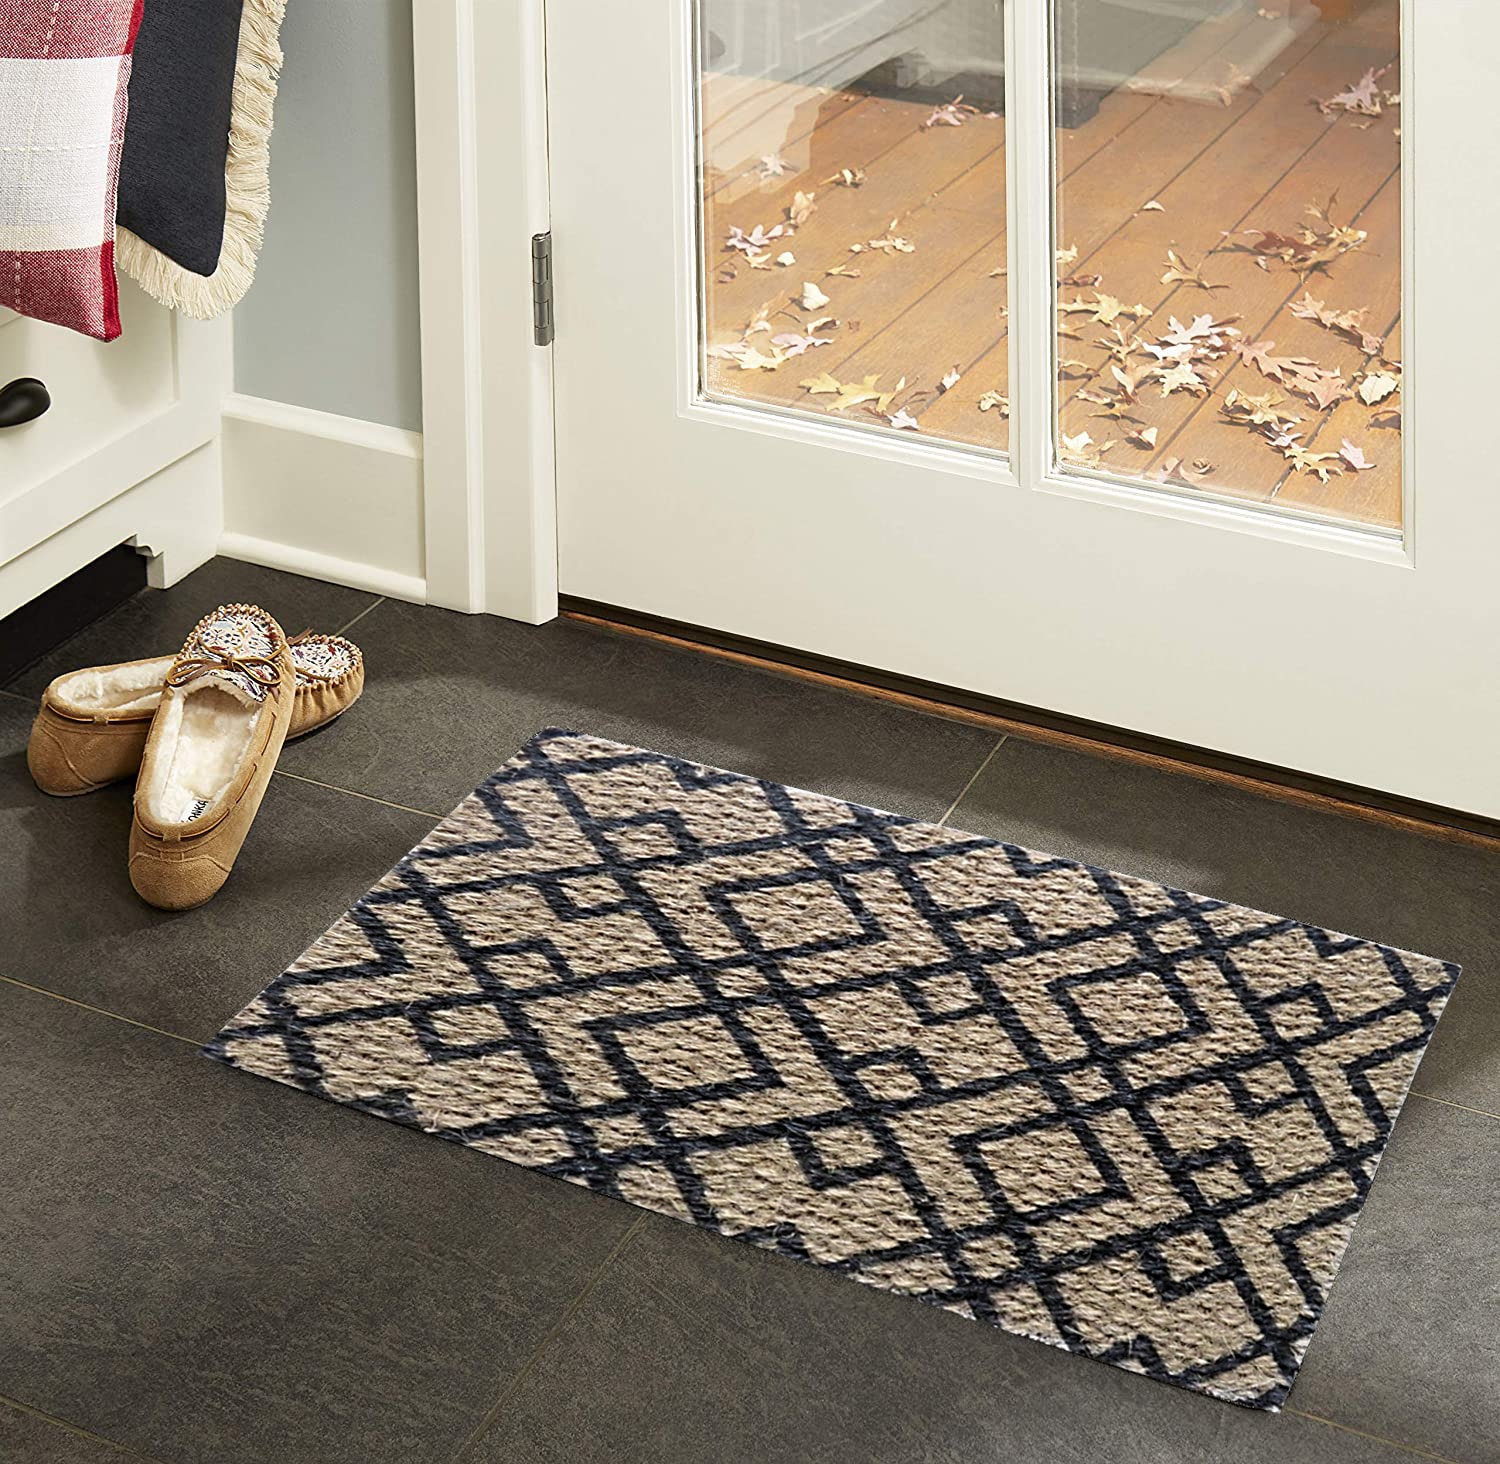 High Quality Home, Commercial Tapestry Bath Mats PVC out Welcome